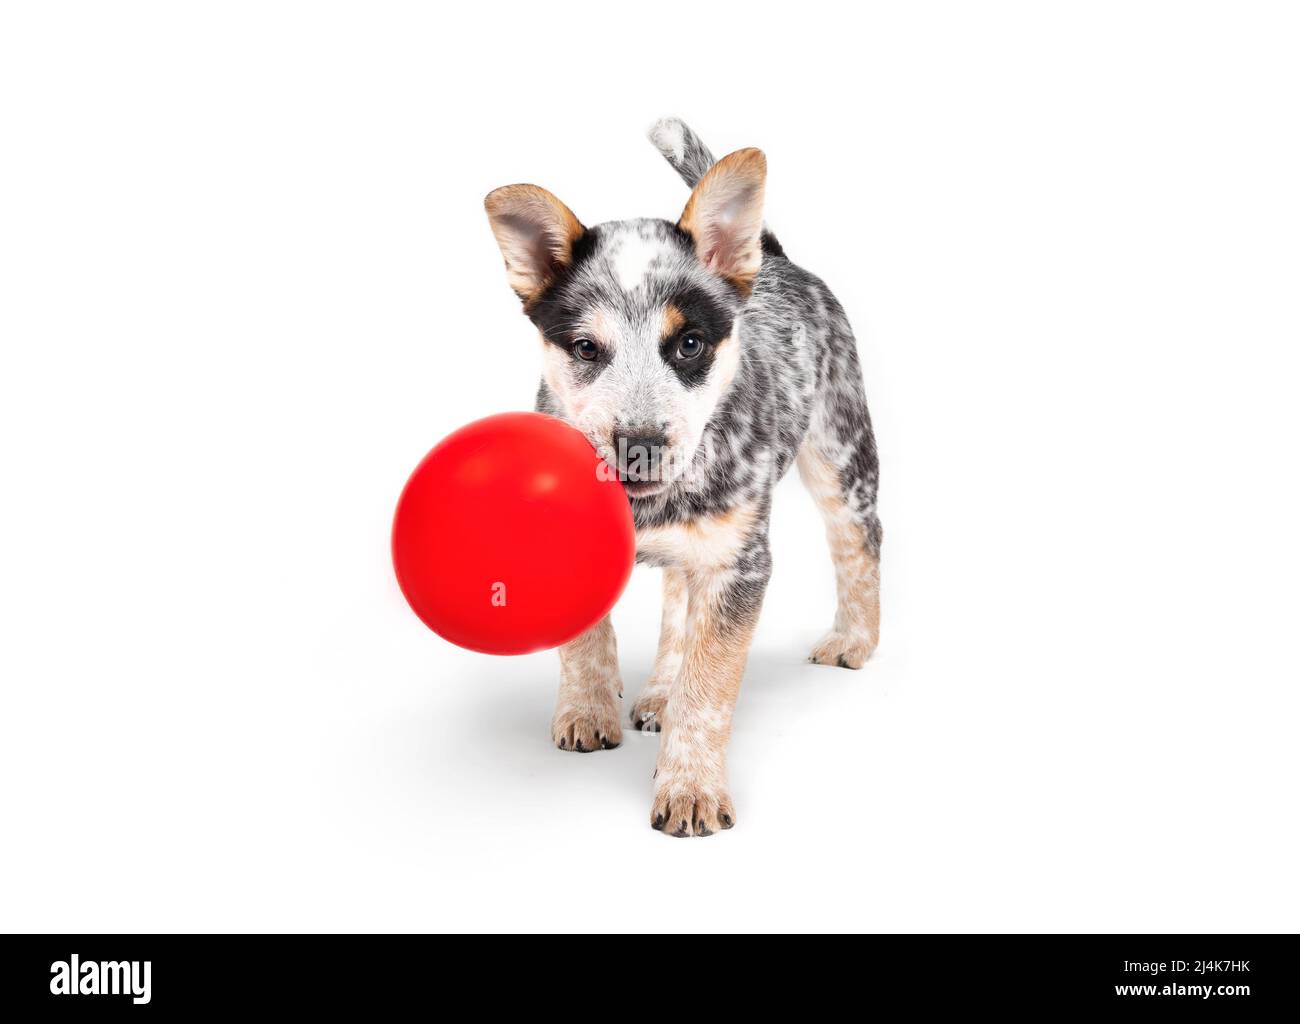 Puppy with balloon in mouth while standing and looking at camera. 9 week old puppy dog with playful or mischievous body language. Australian heeler or Stock Photo